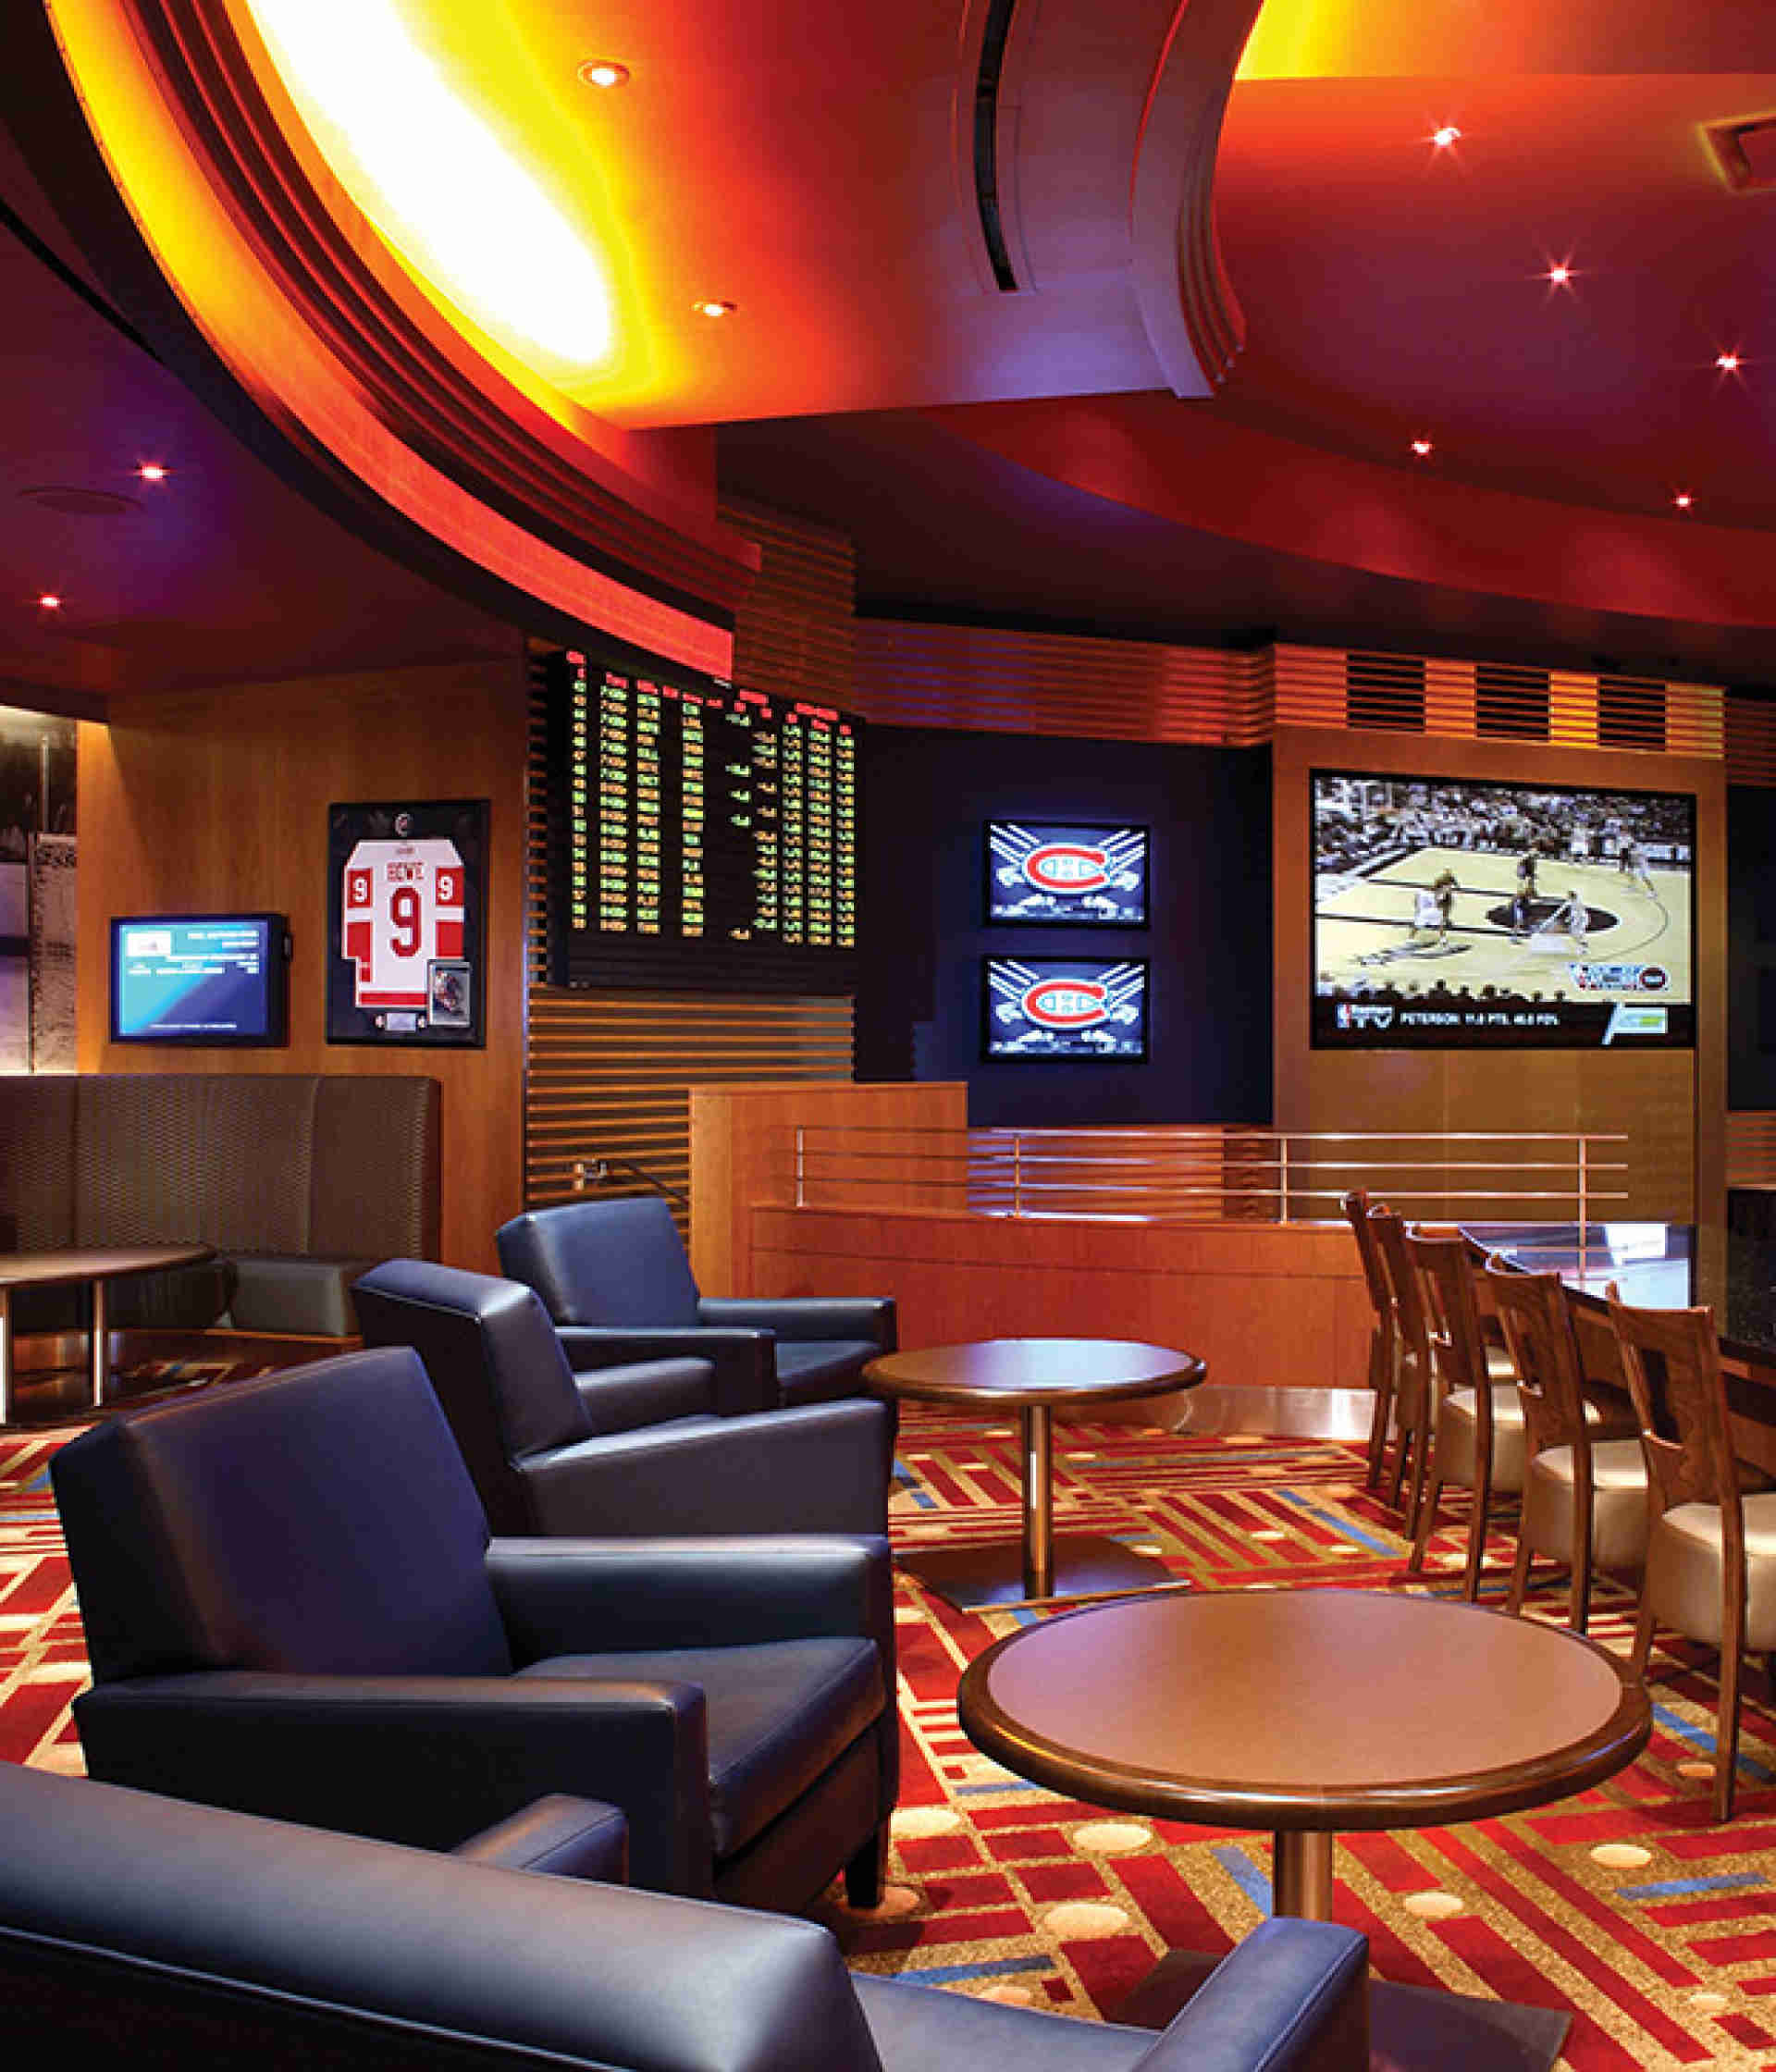  Lounge Area at the Legends Sports Lounge - Audio Visual Consulting - Engineering Harmonics